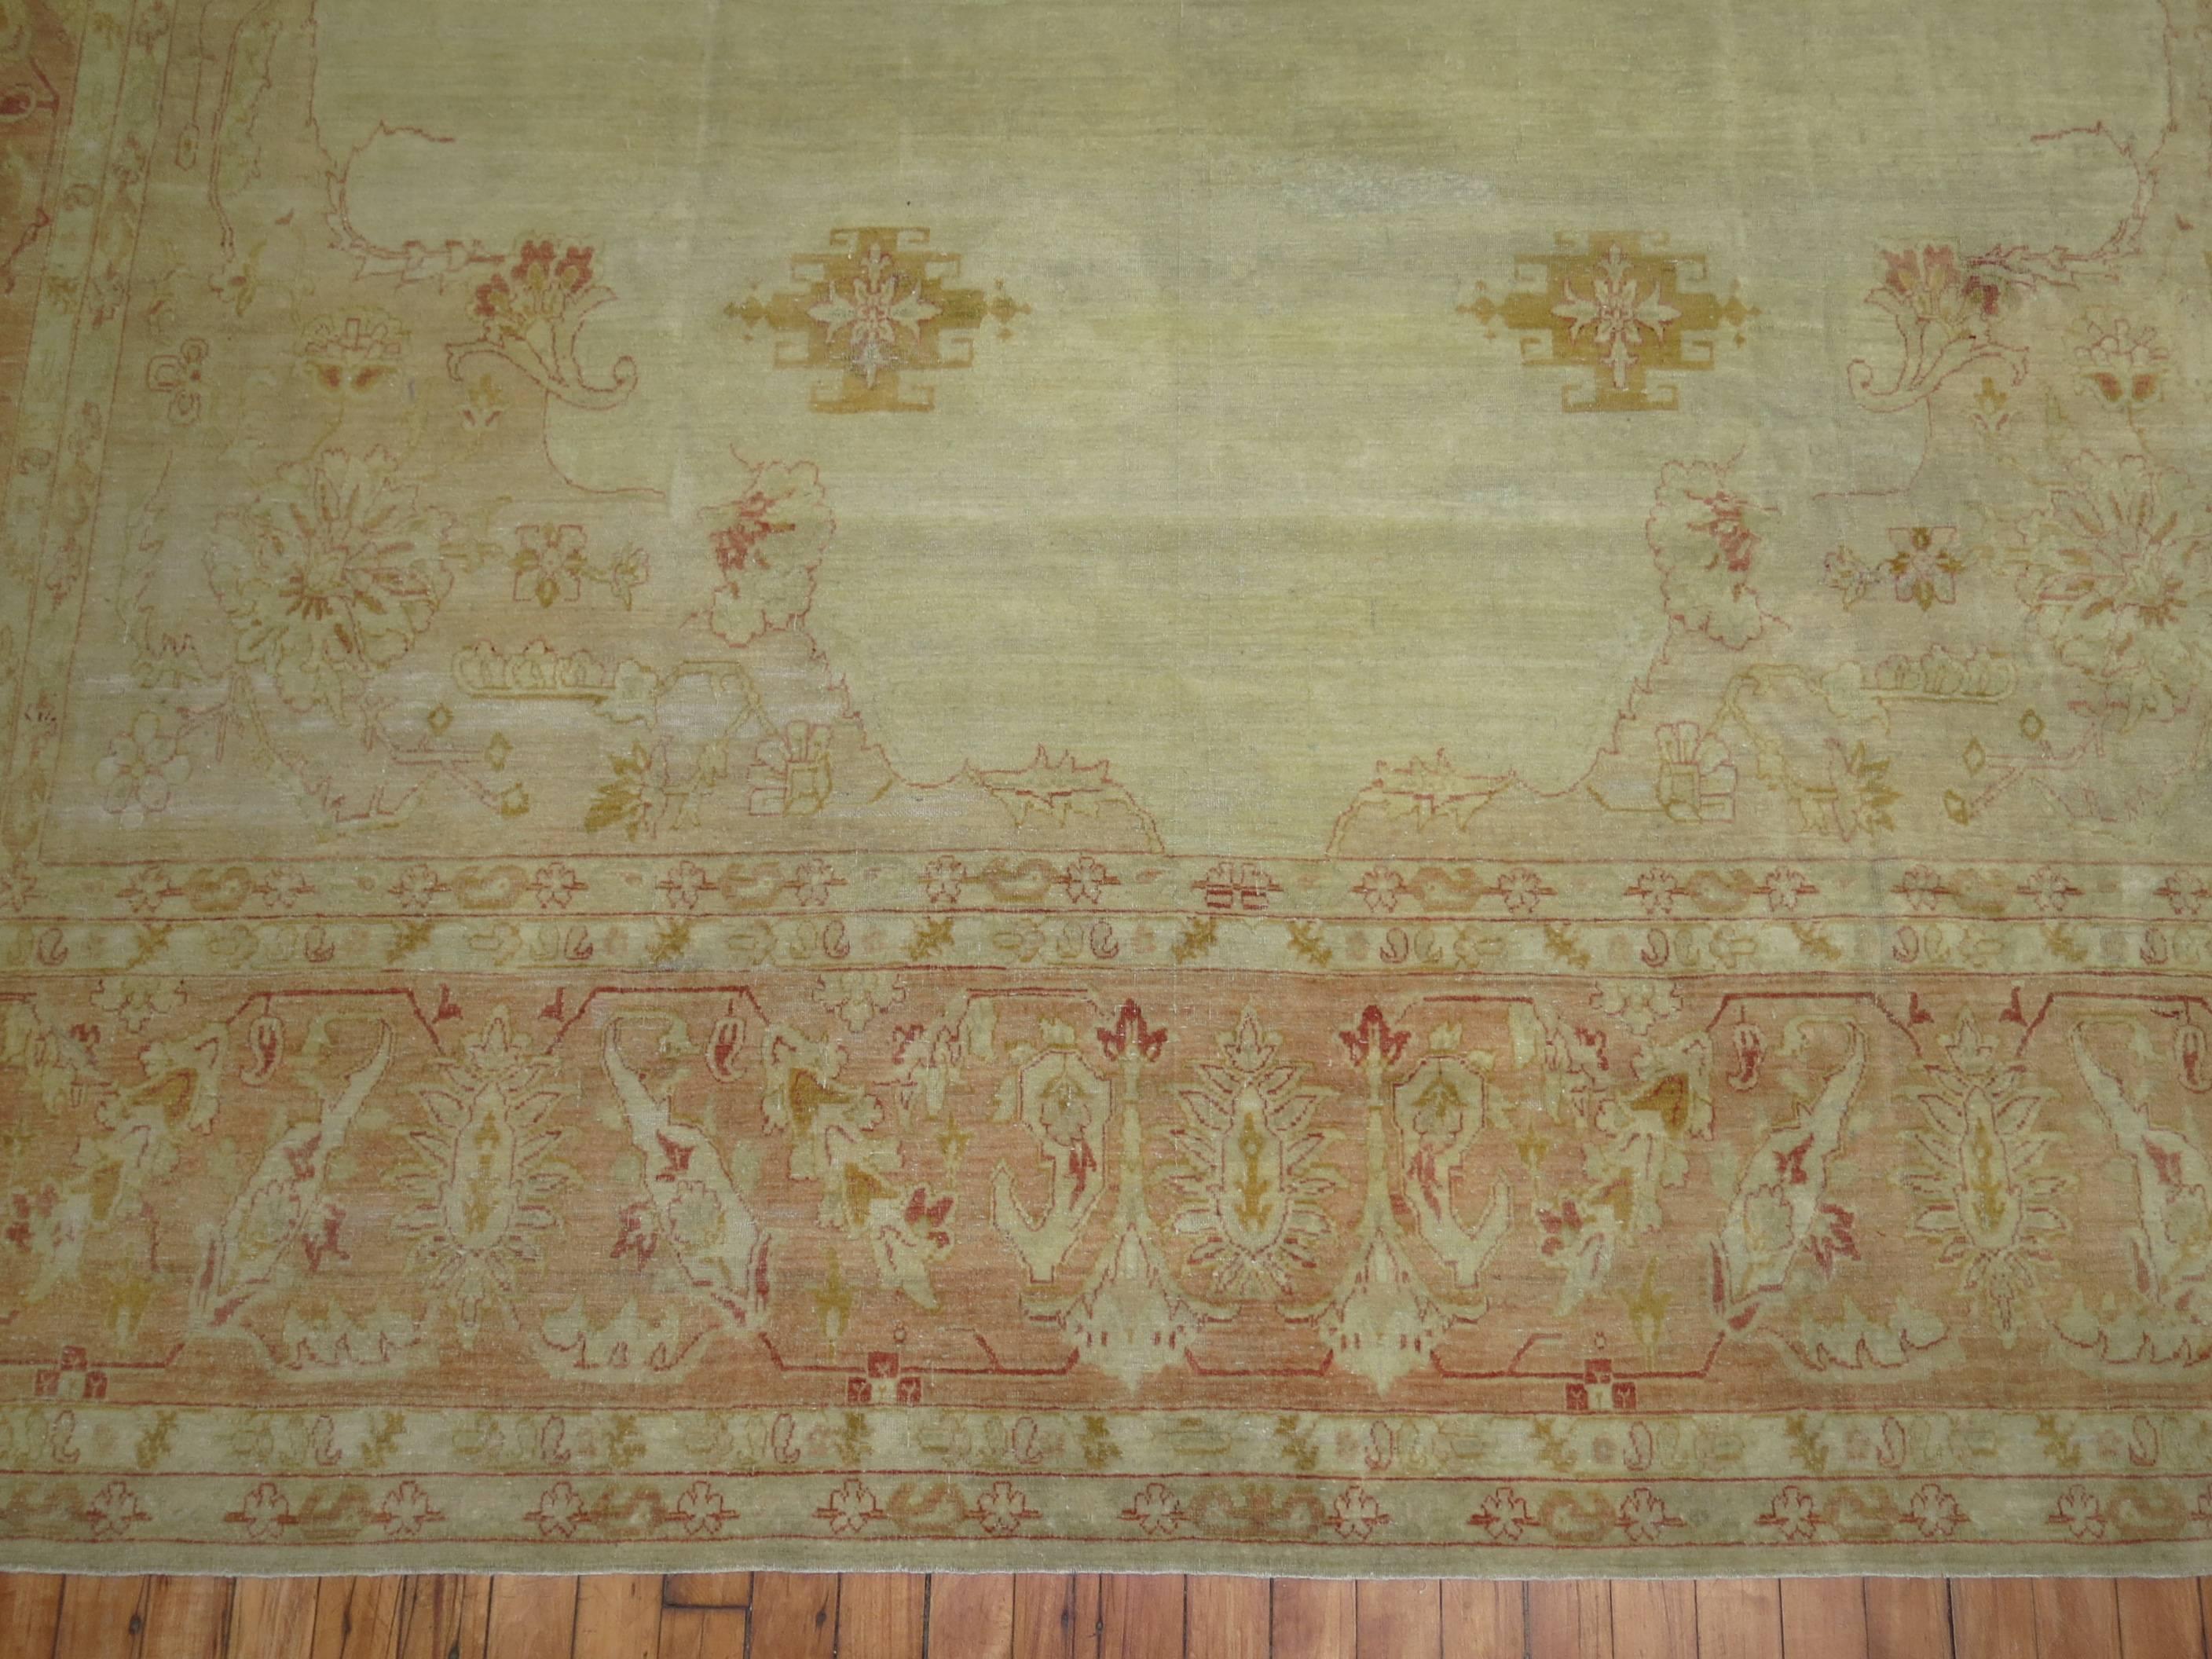 An extremely finely woven mid-19th century weave in subtle colors.